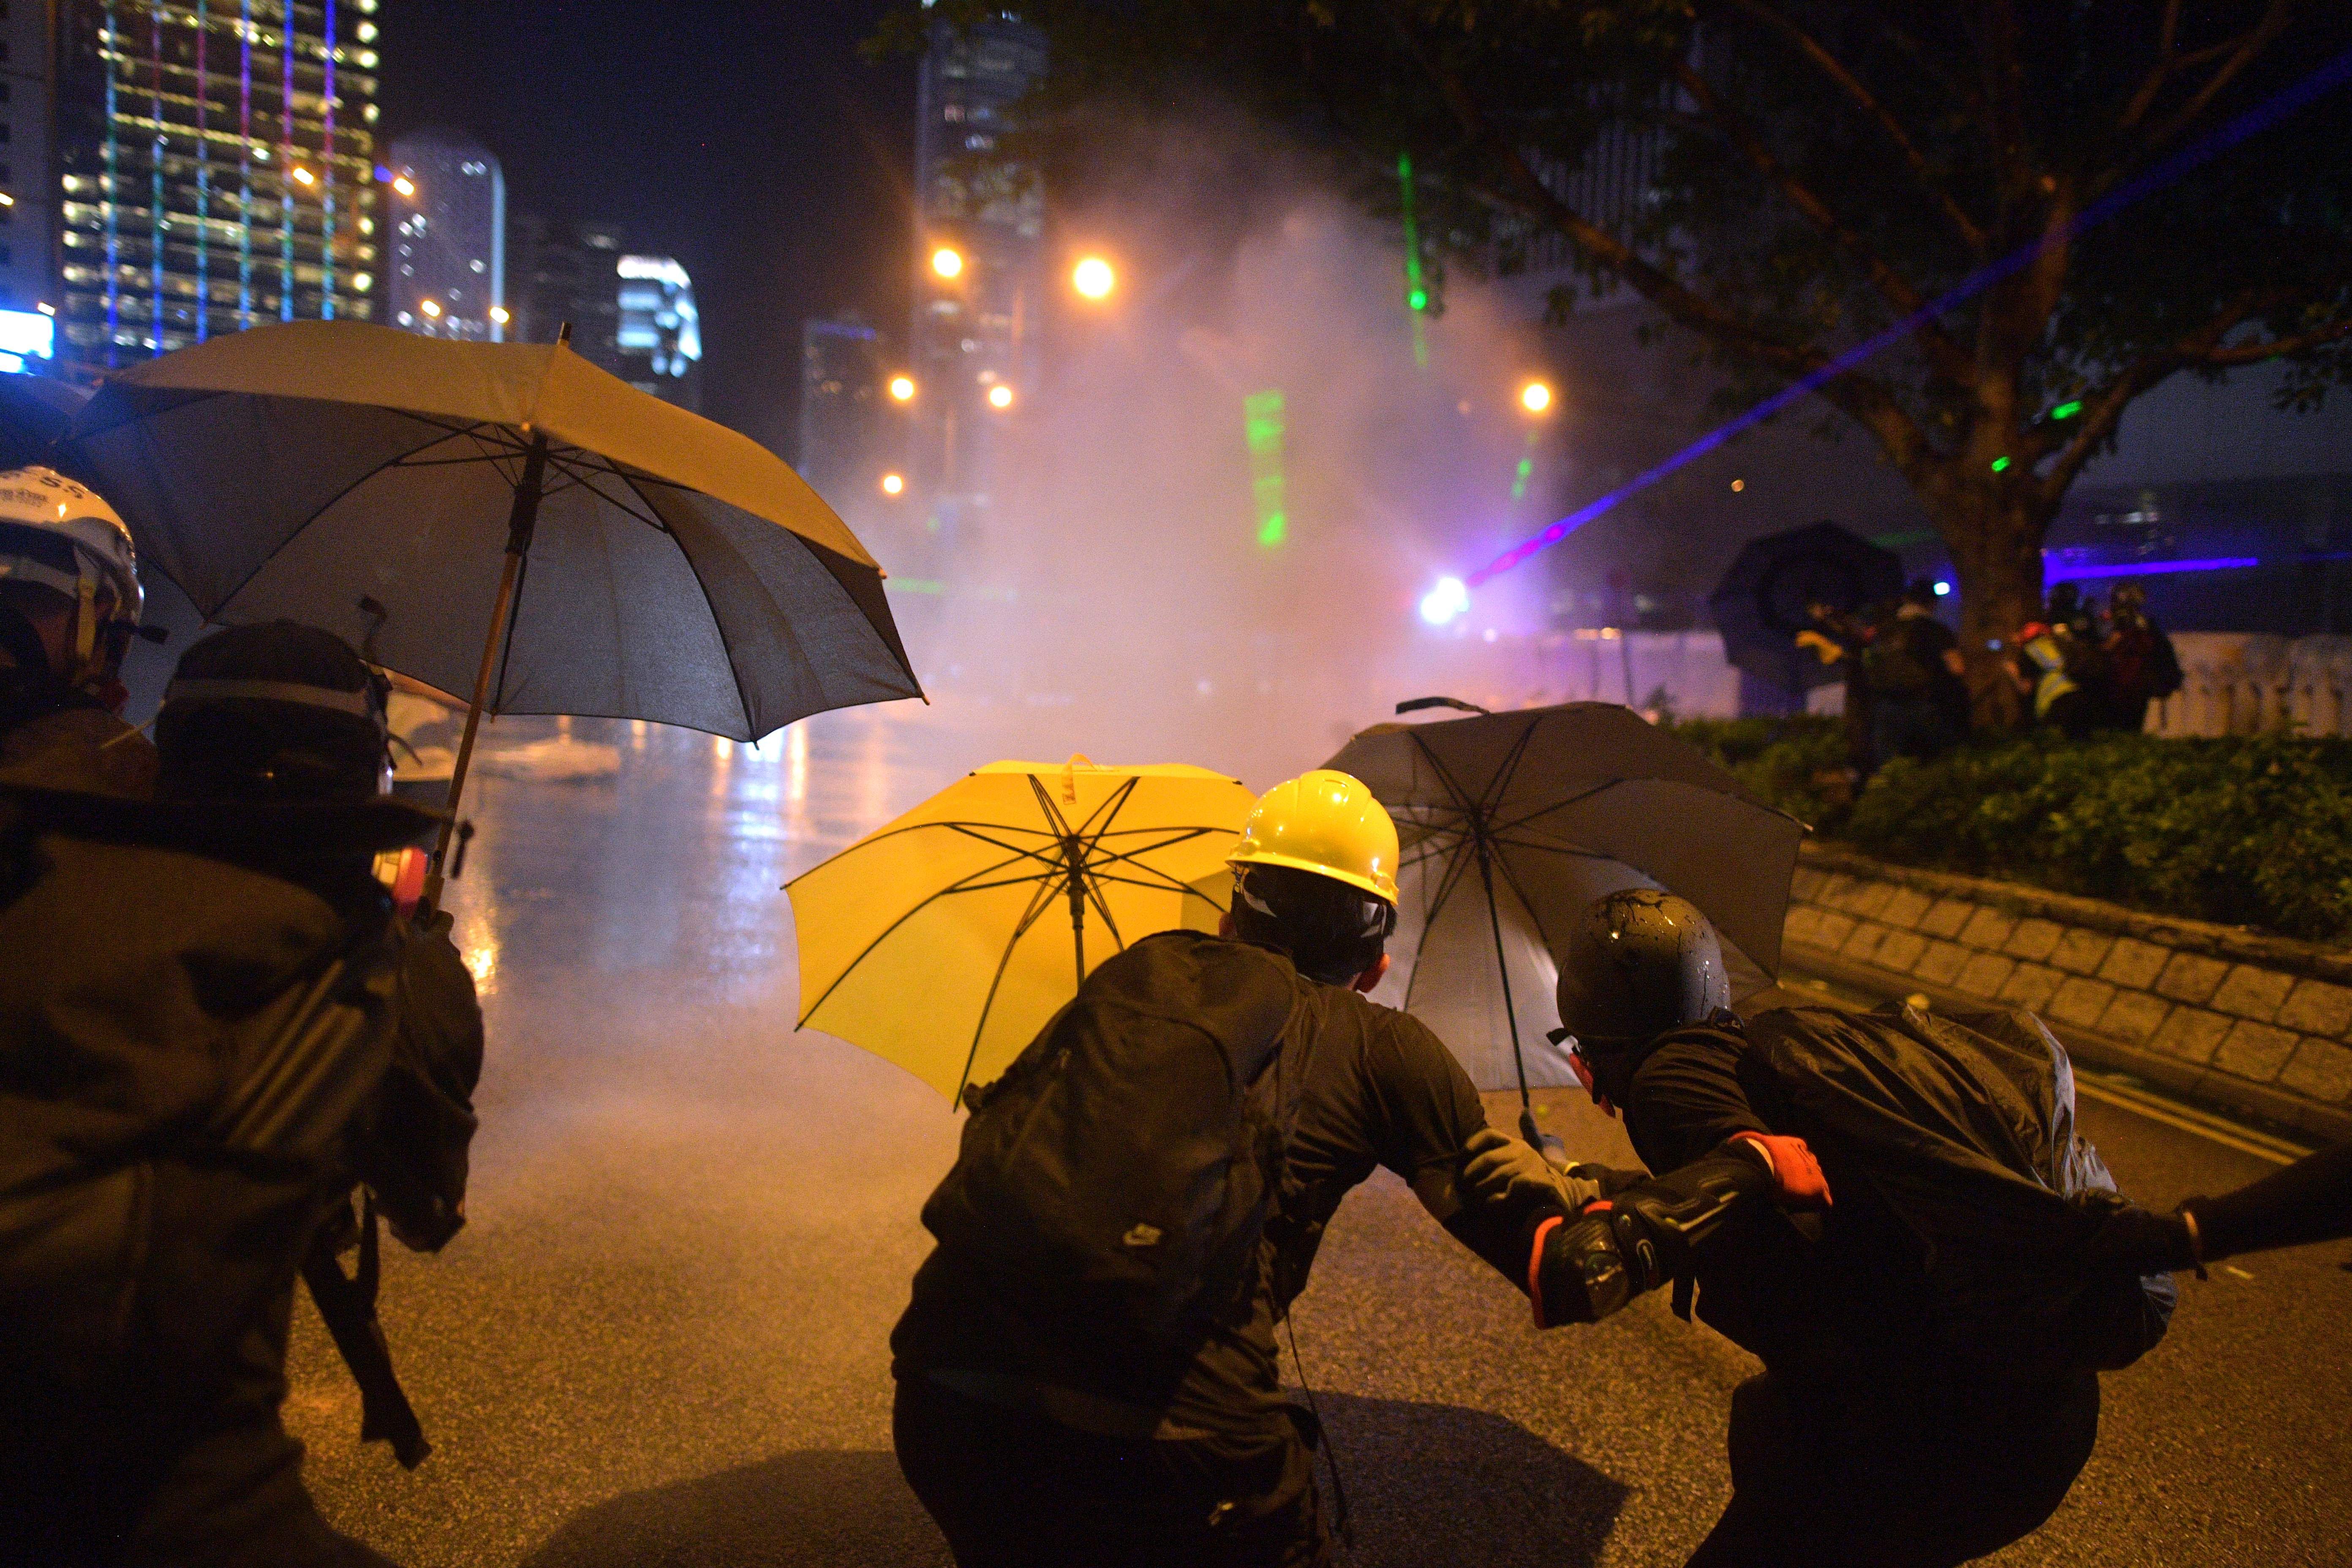  Protesters protect themselves after police fired water cannon toward them after the group occupied a main road in the Admiralty area in Hong Kong on September 28